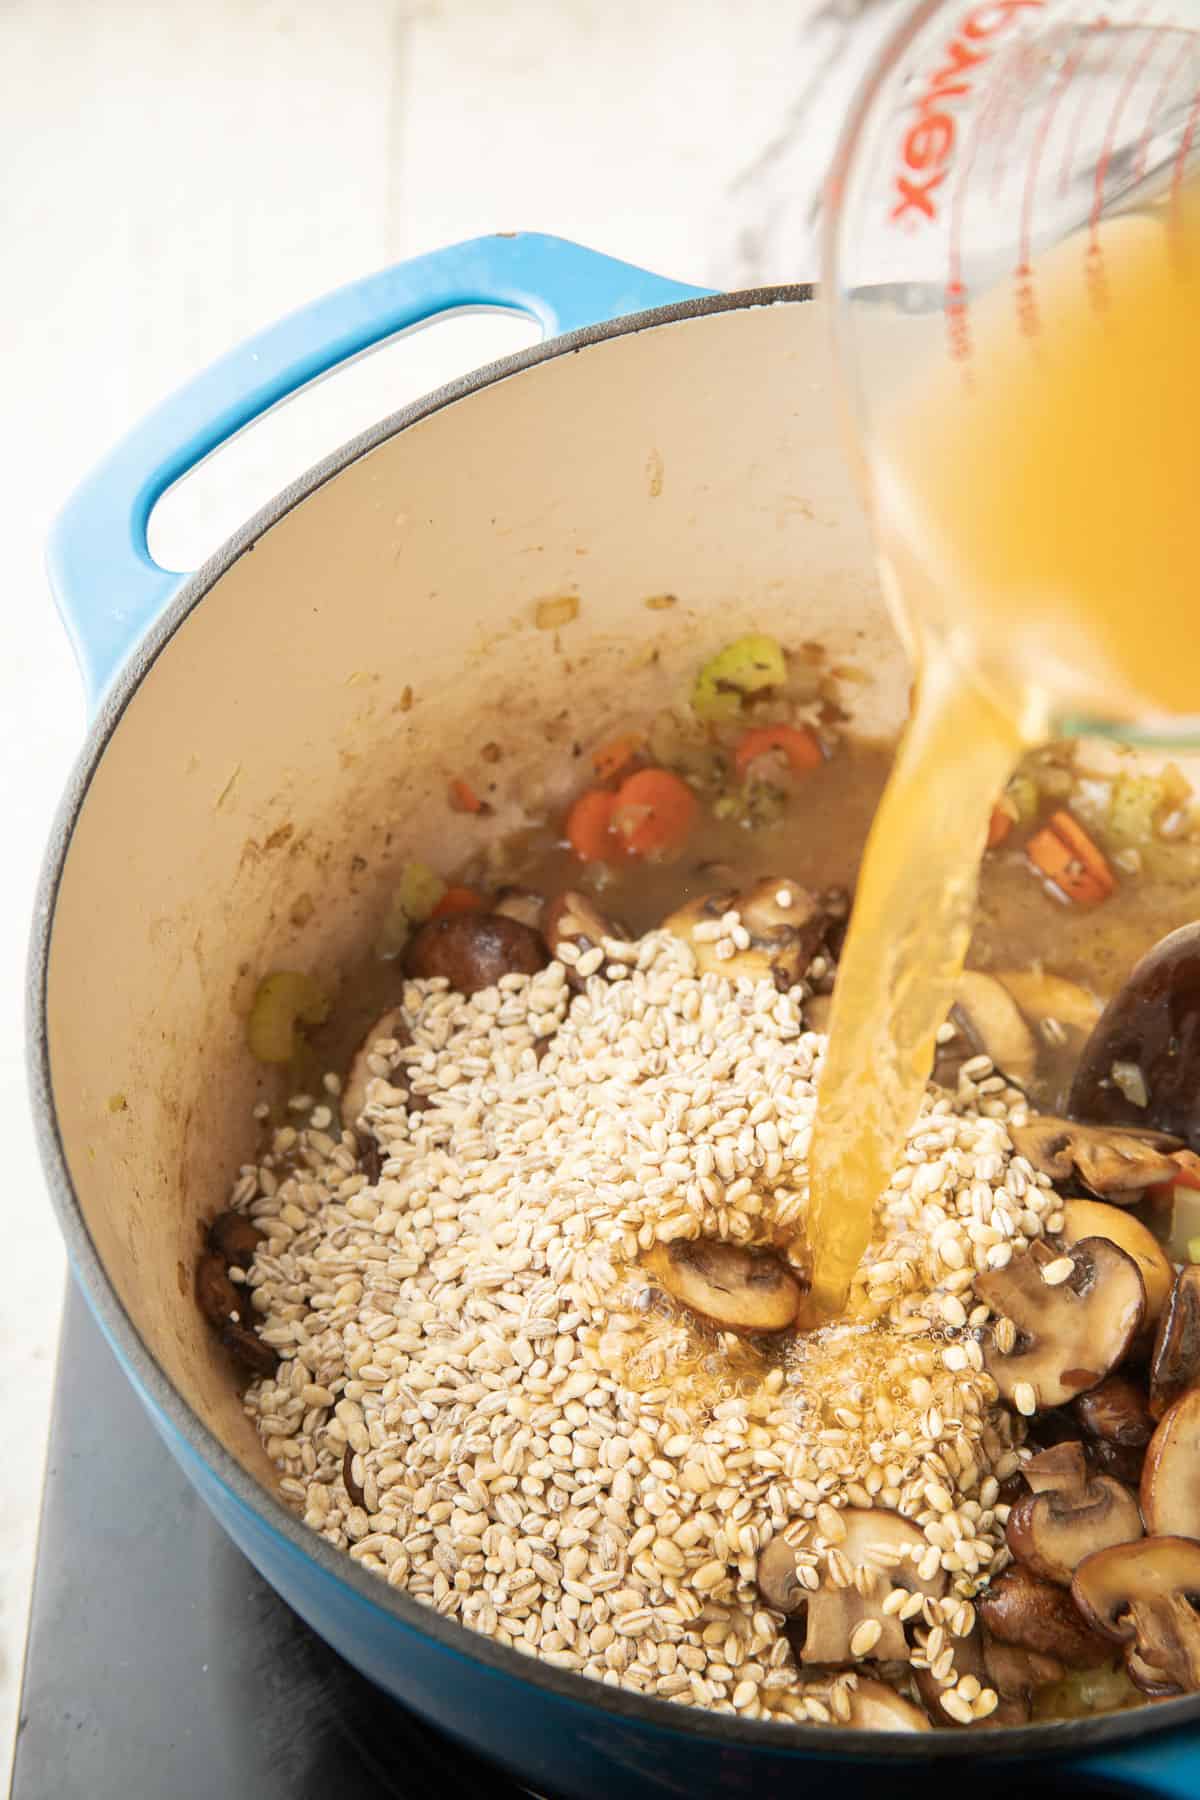 Broth being poured into a pot filled with vegetables, mushrooms, and pearl barley.